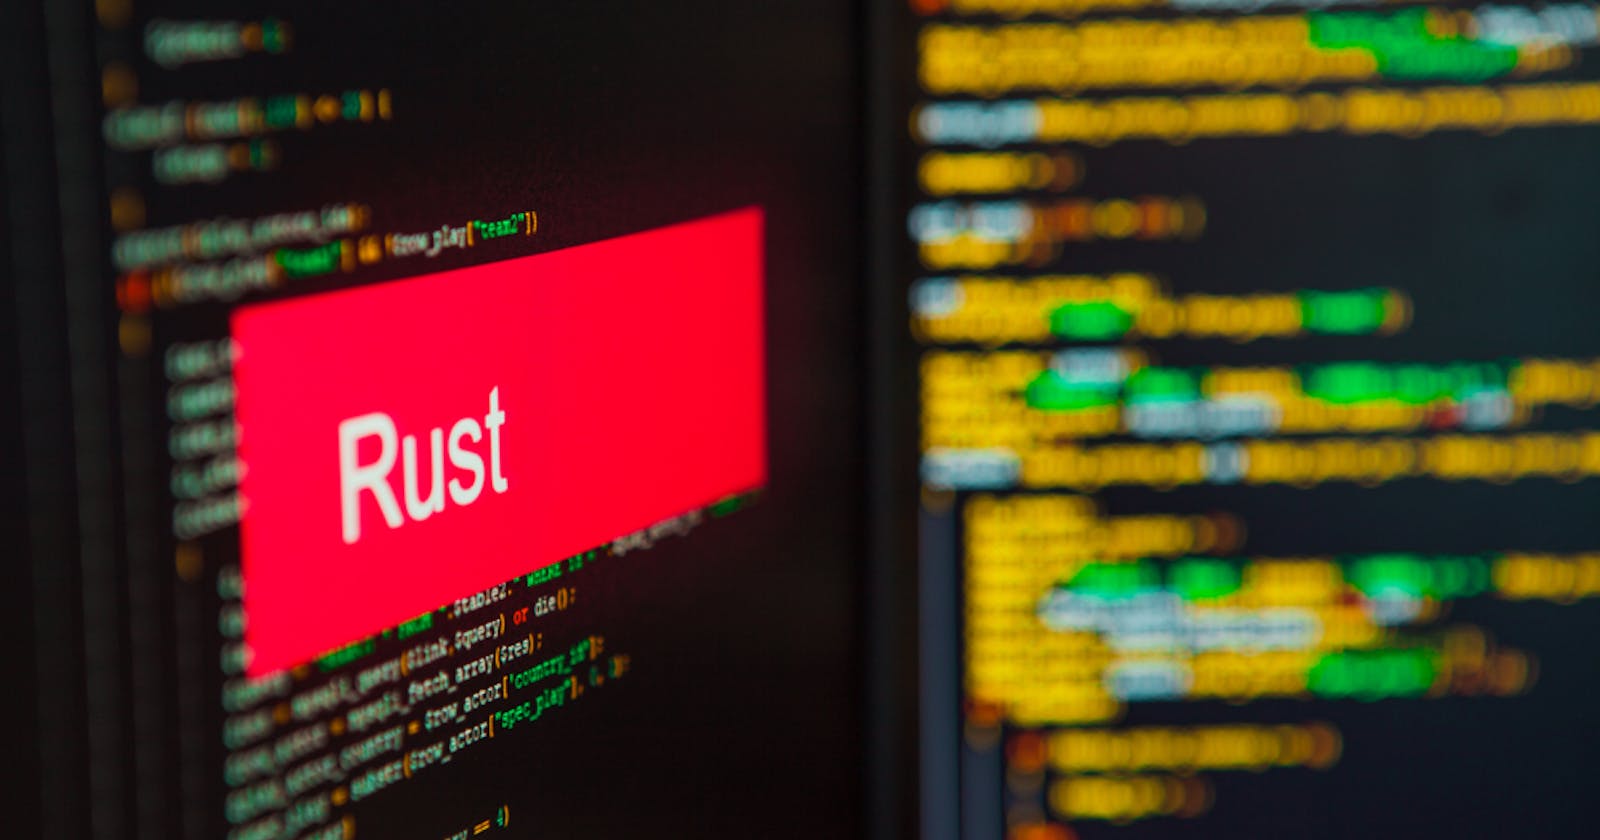 Learn Rust Programming Language in One Article